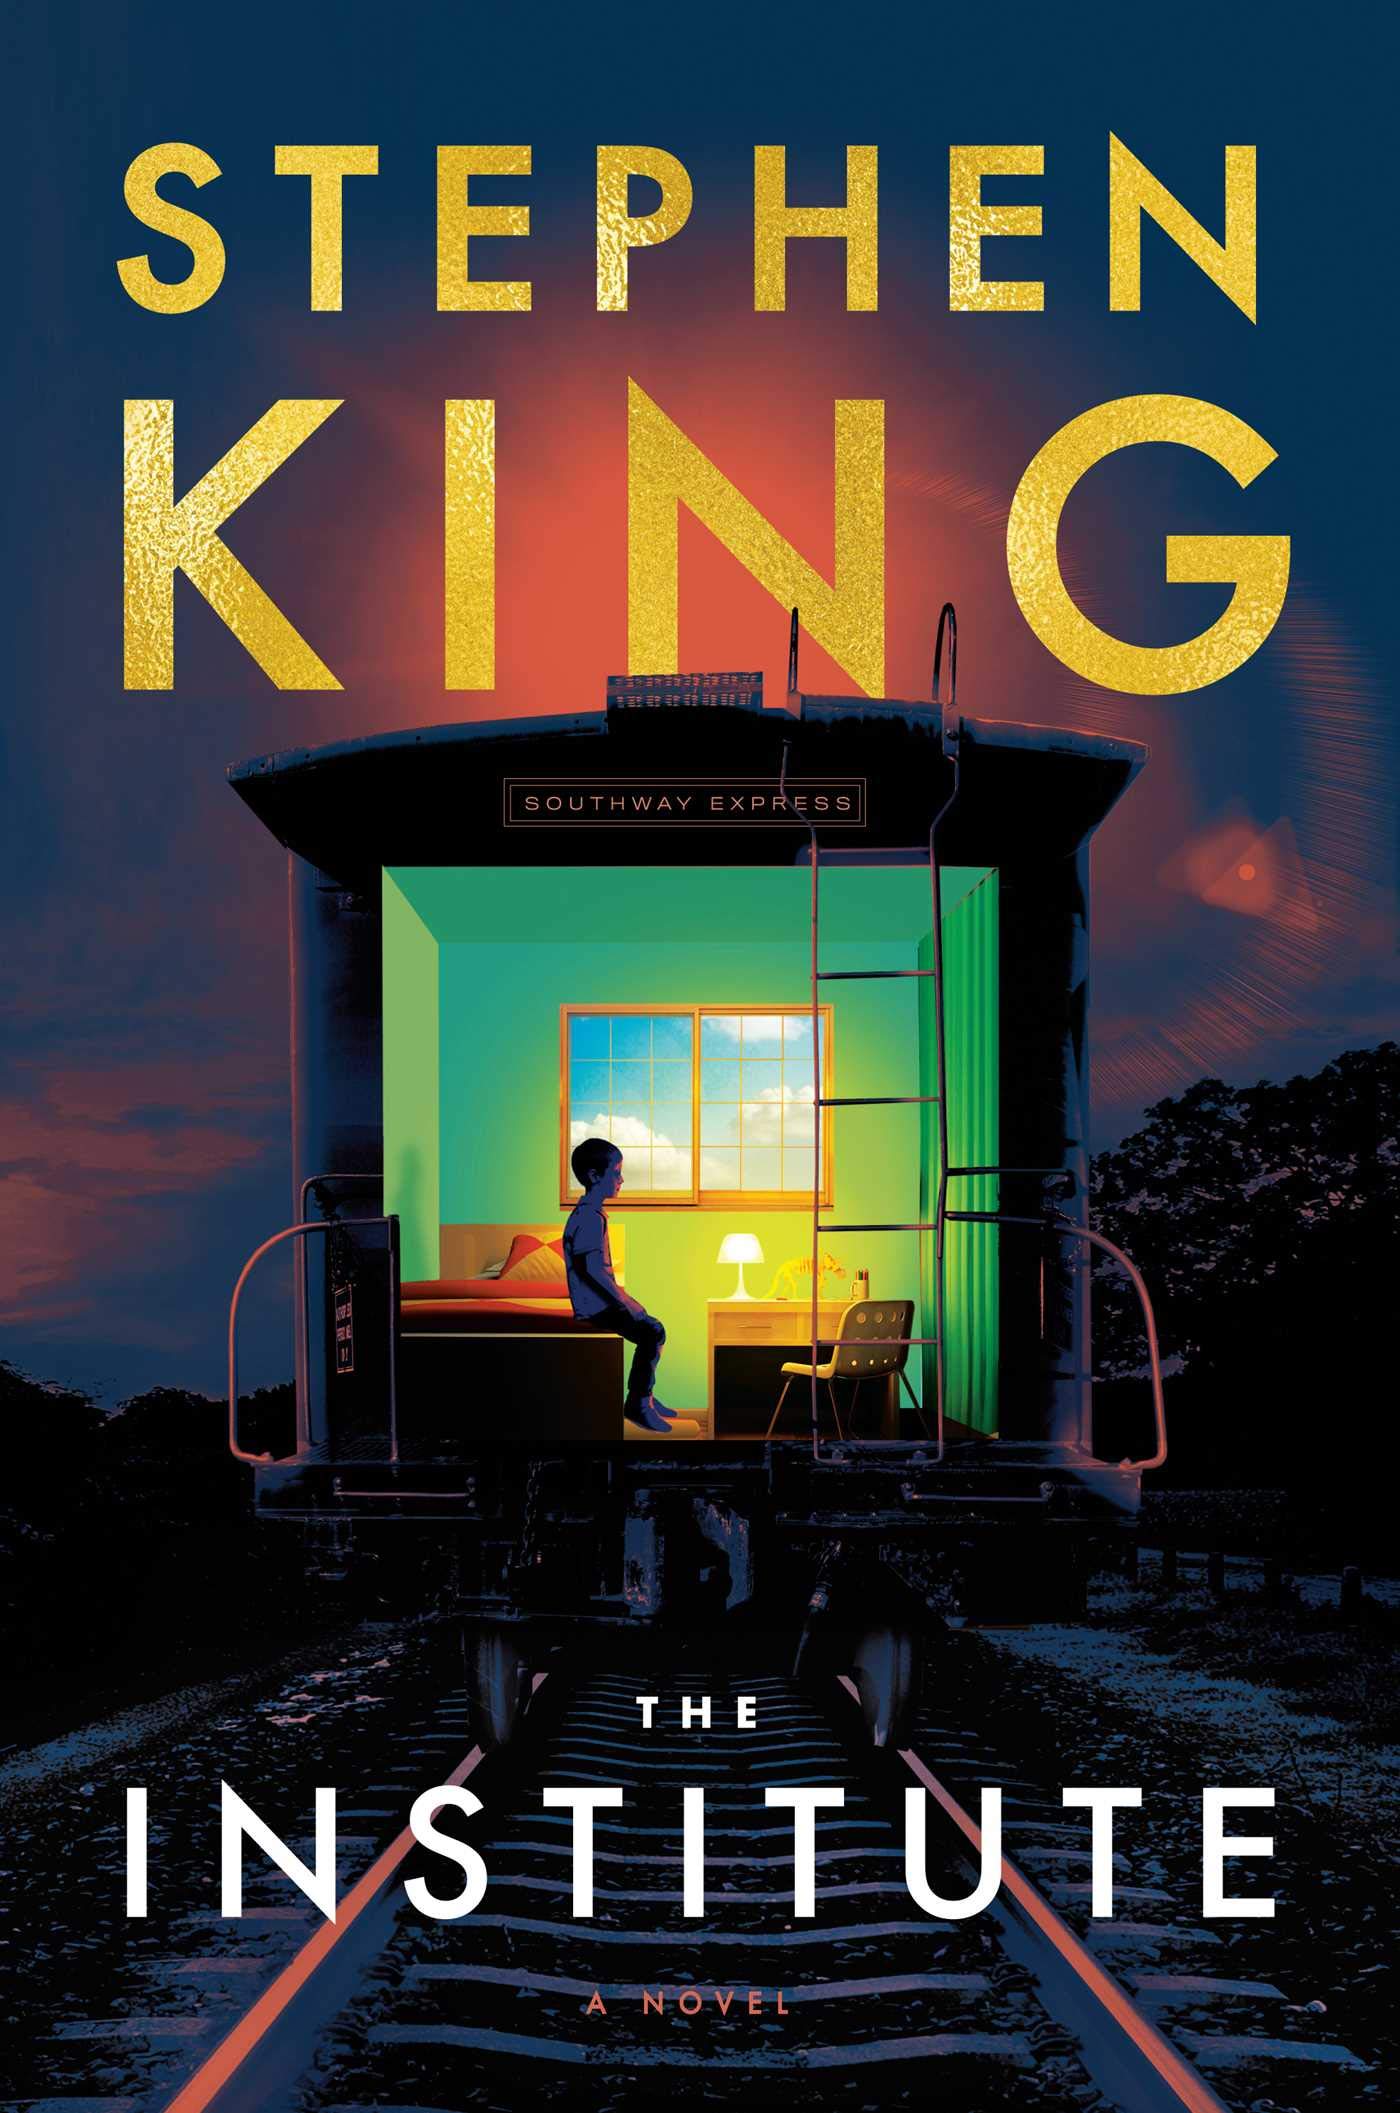 Friday Reads: The Institute by Stephen King